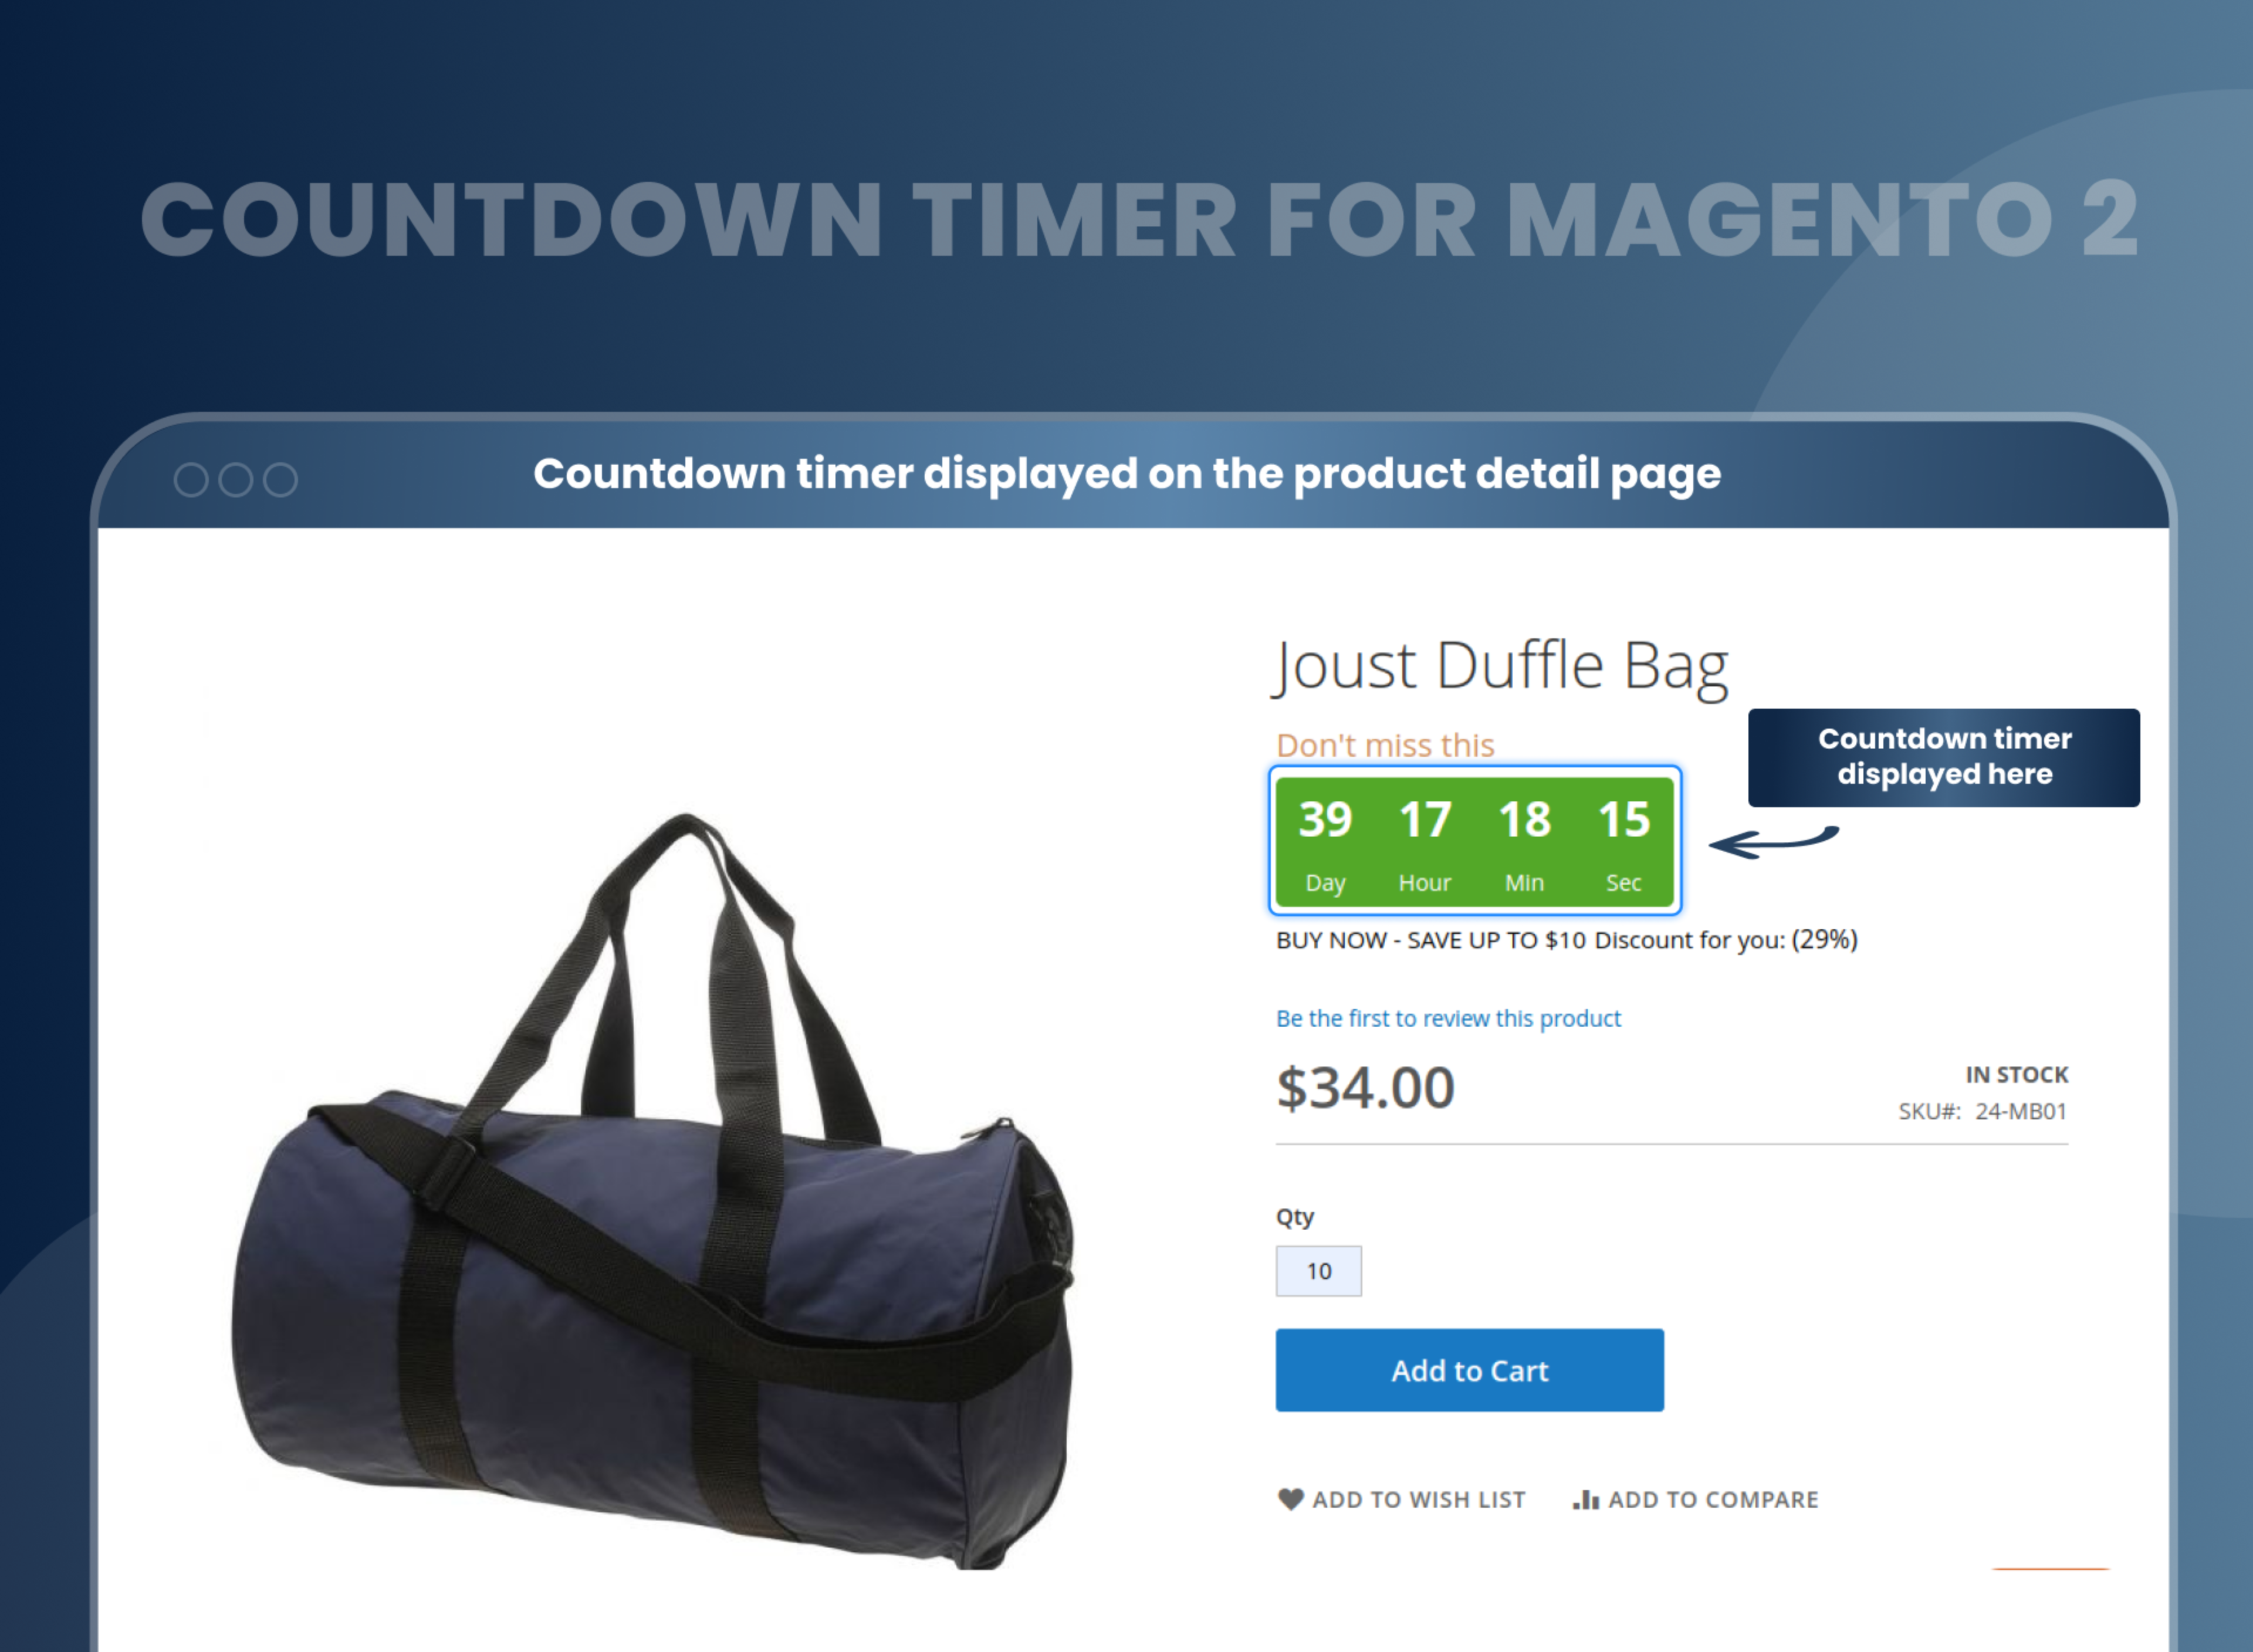 Countdown timer displayed on the product detail page